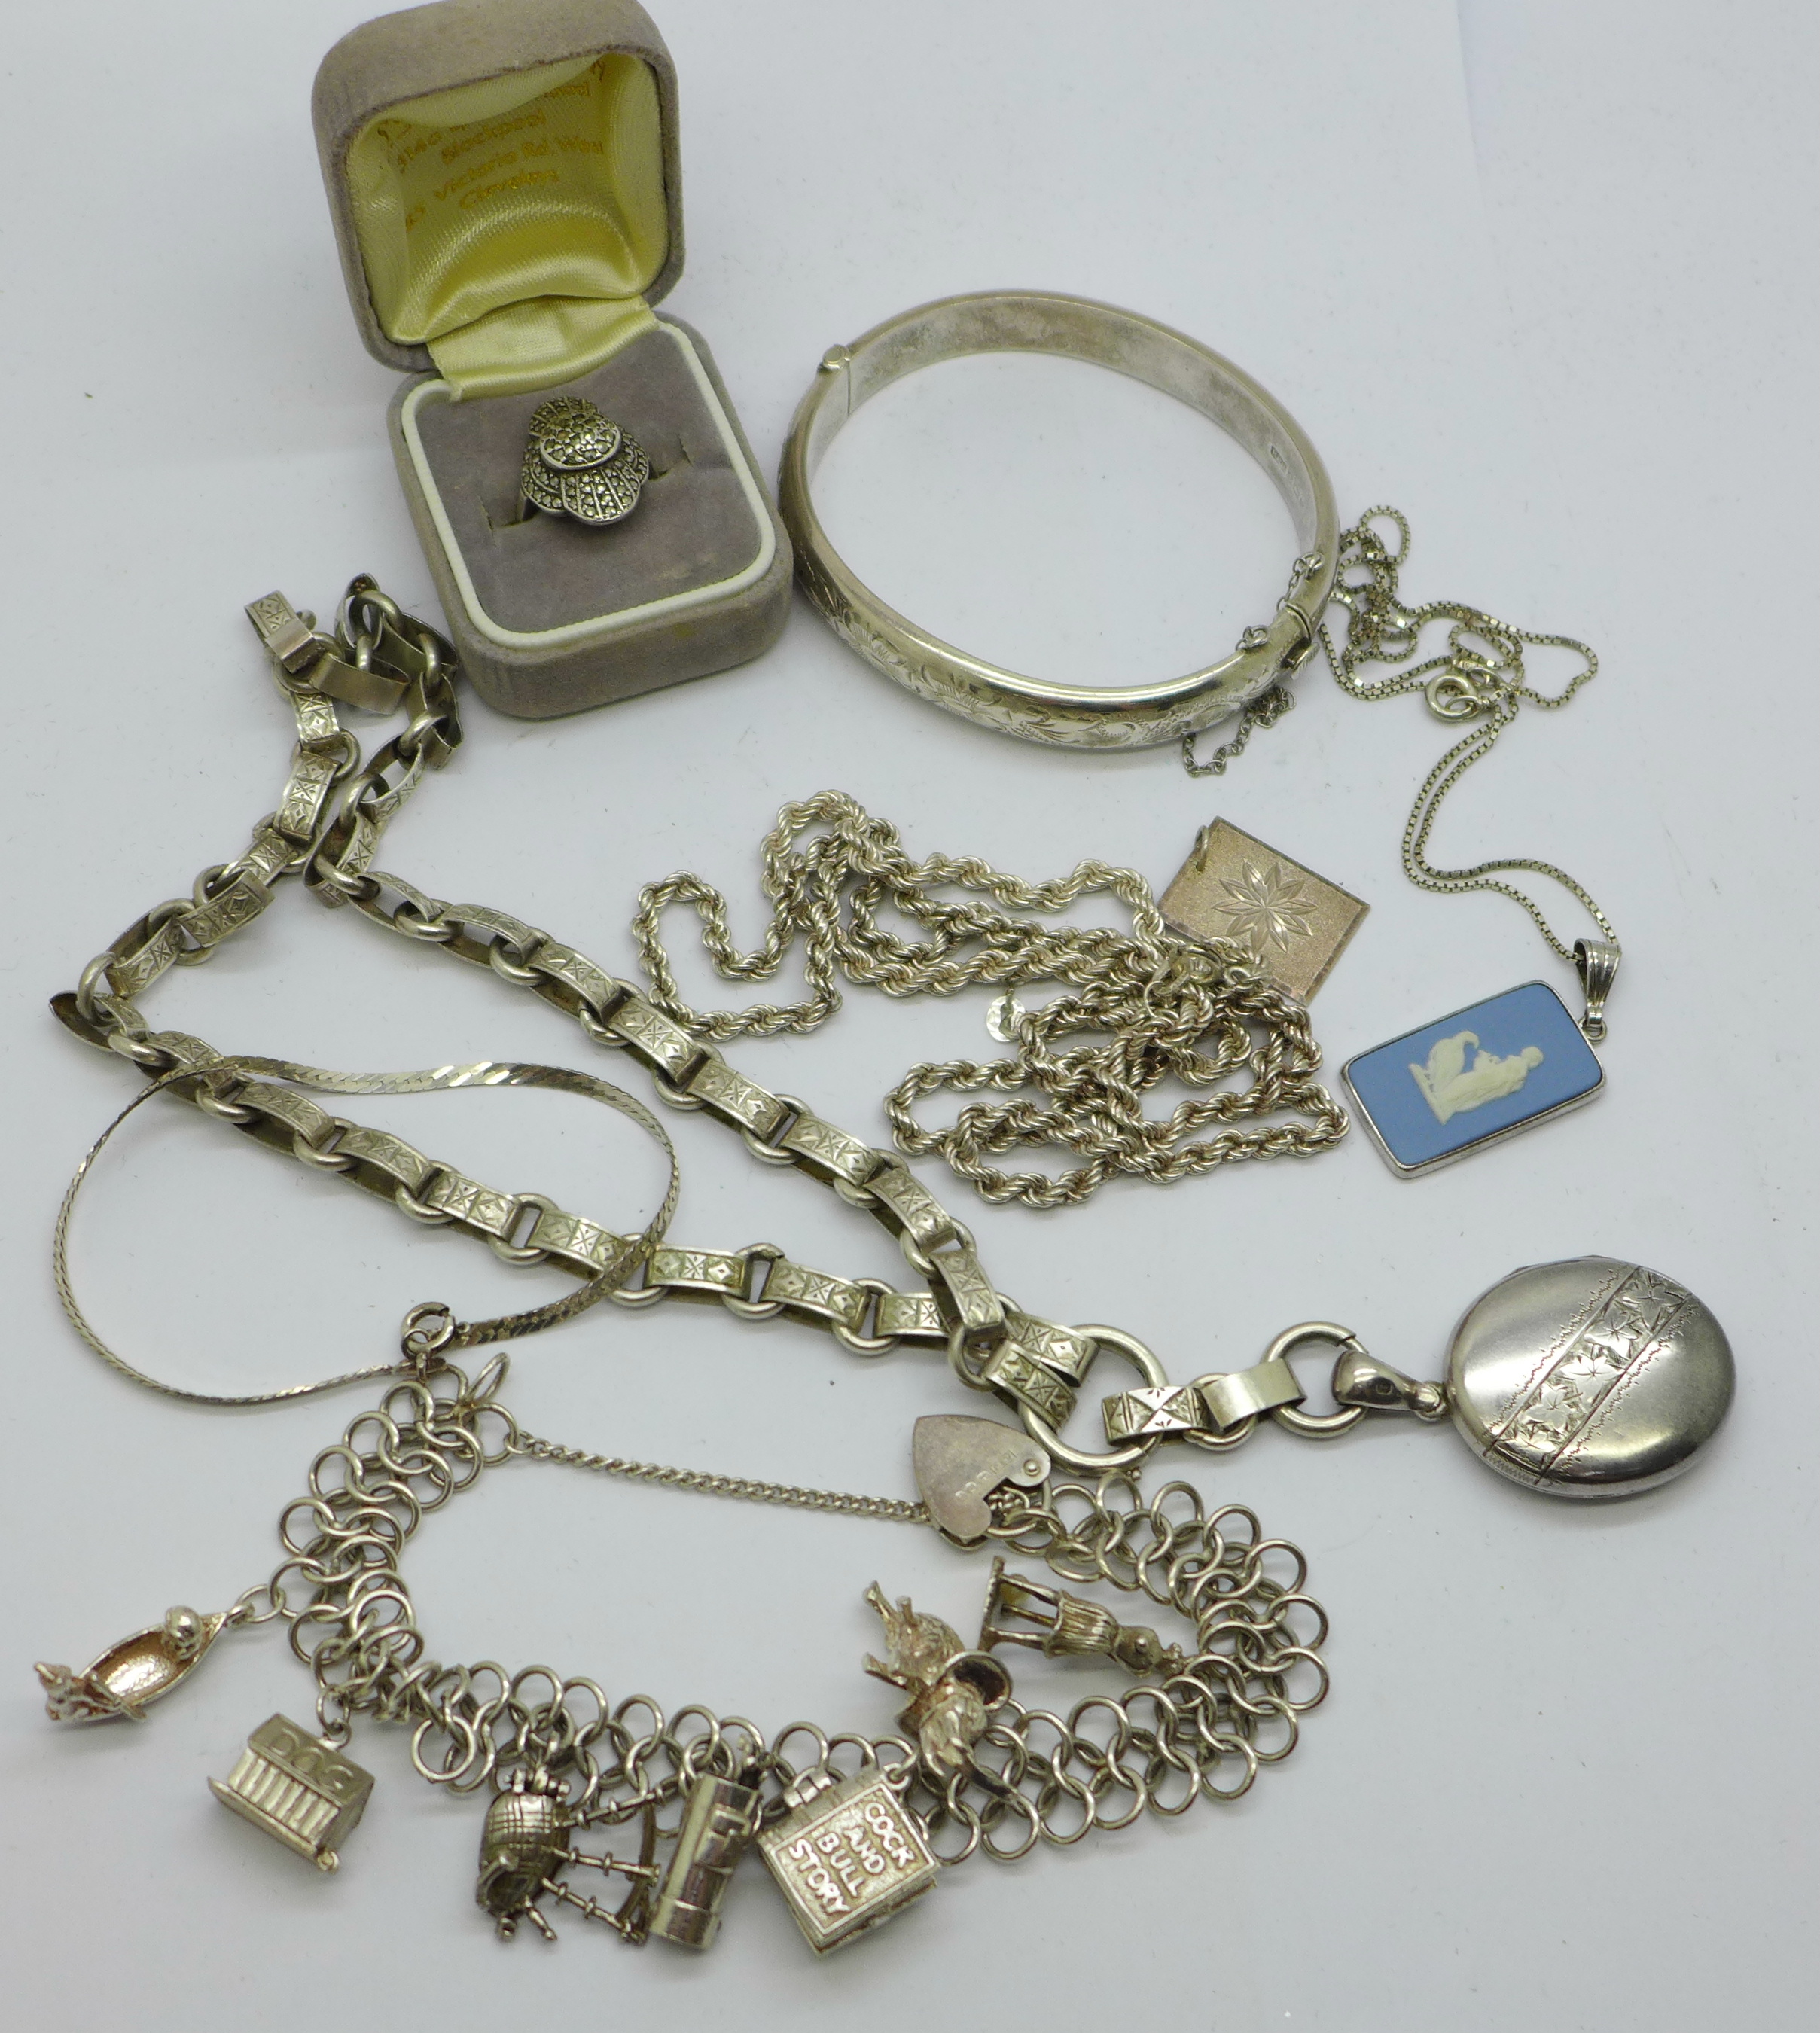 A collection of silver jewellery including a bangle, charm bracelet, locket on chain and marcasite